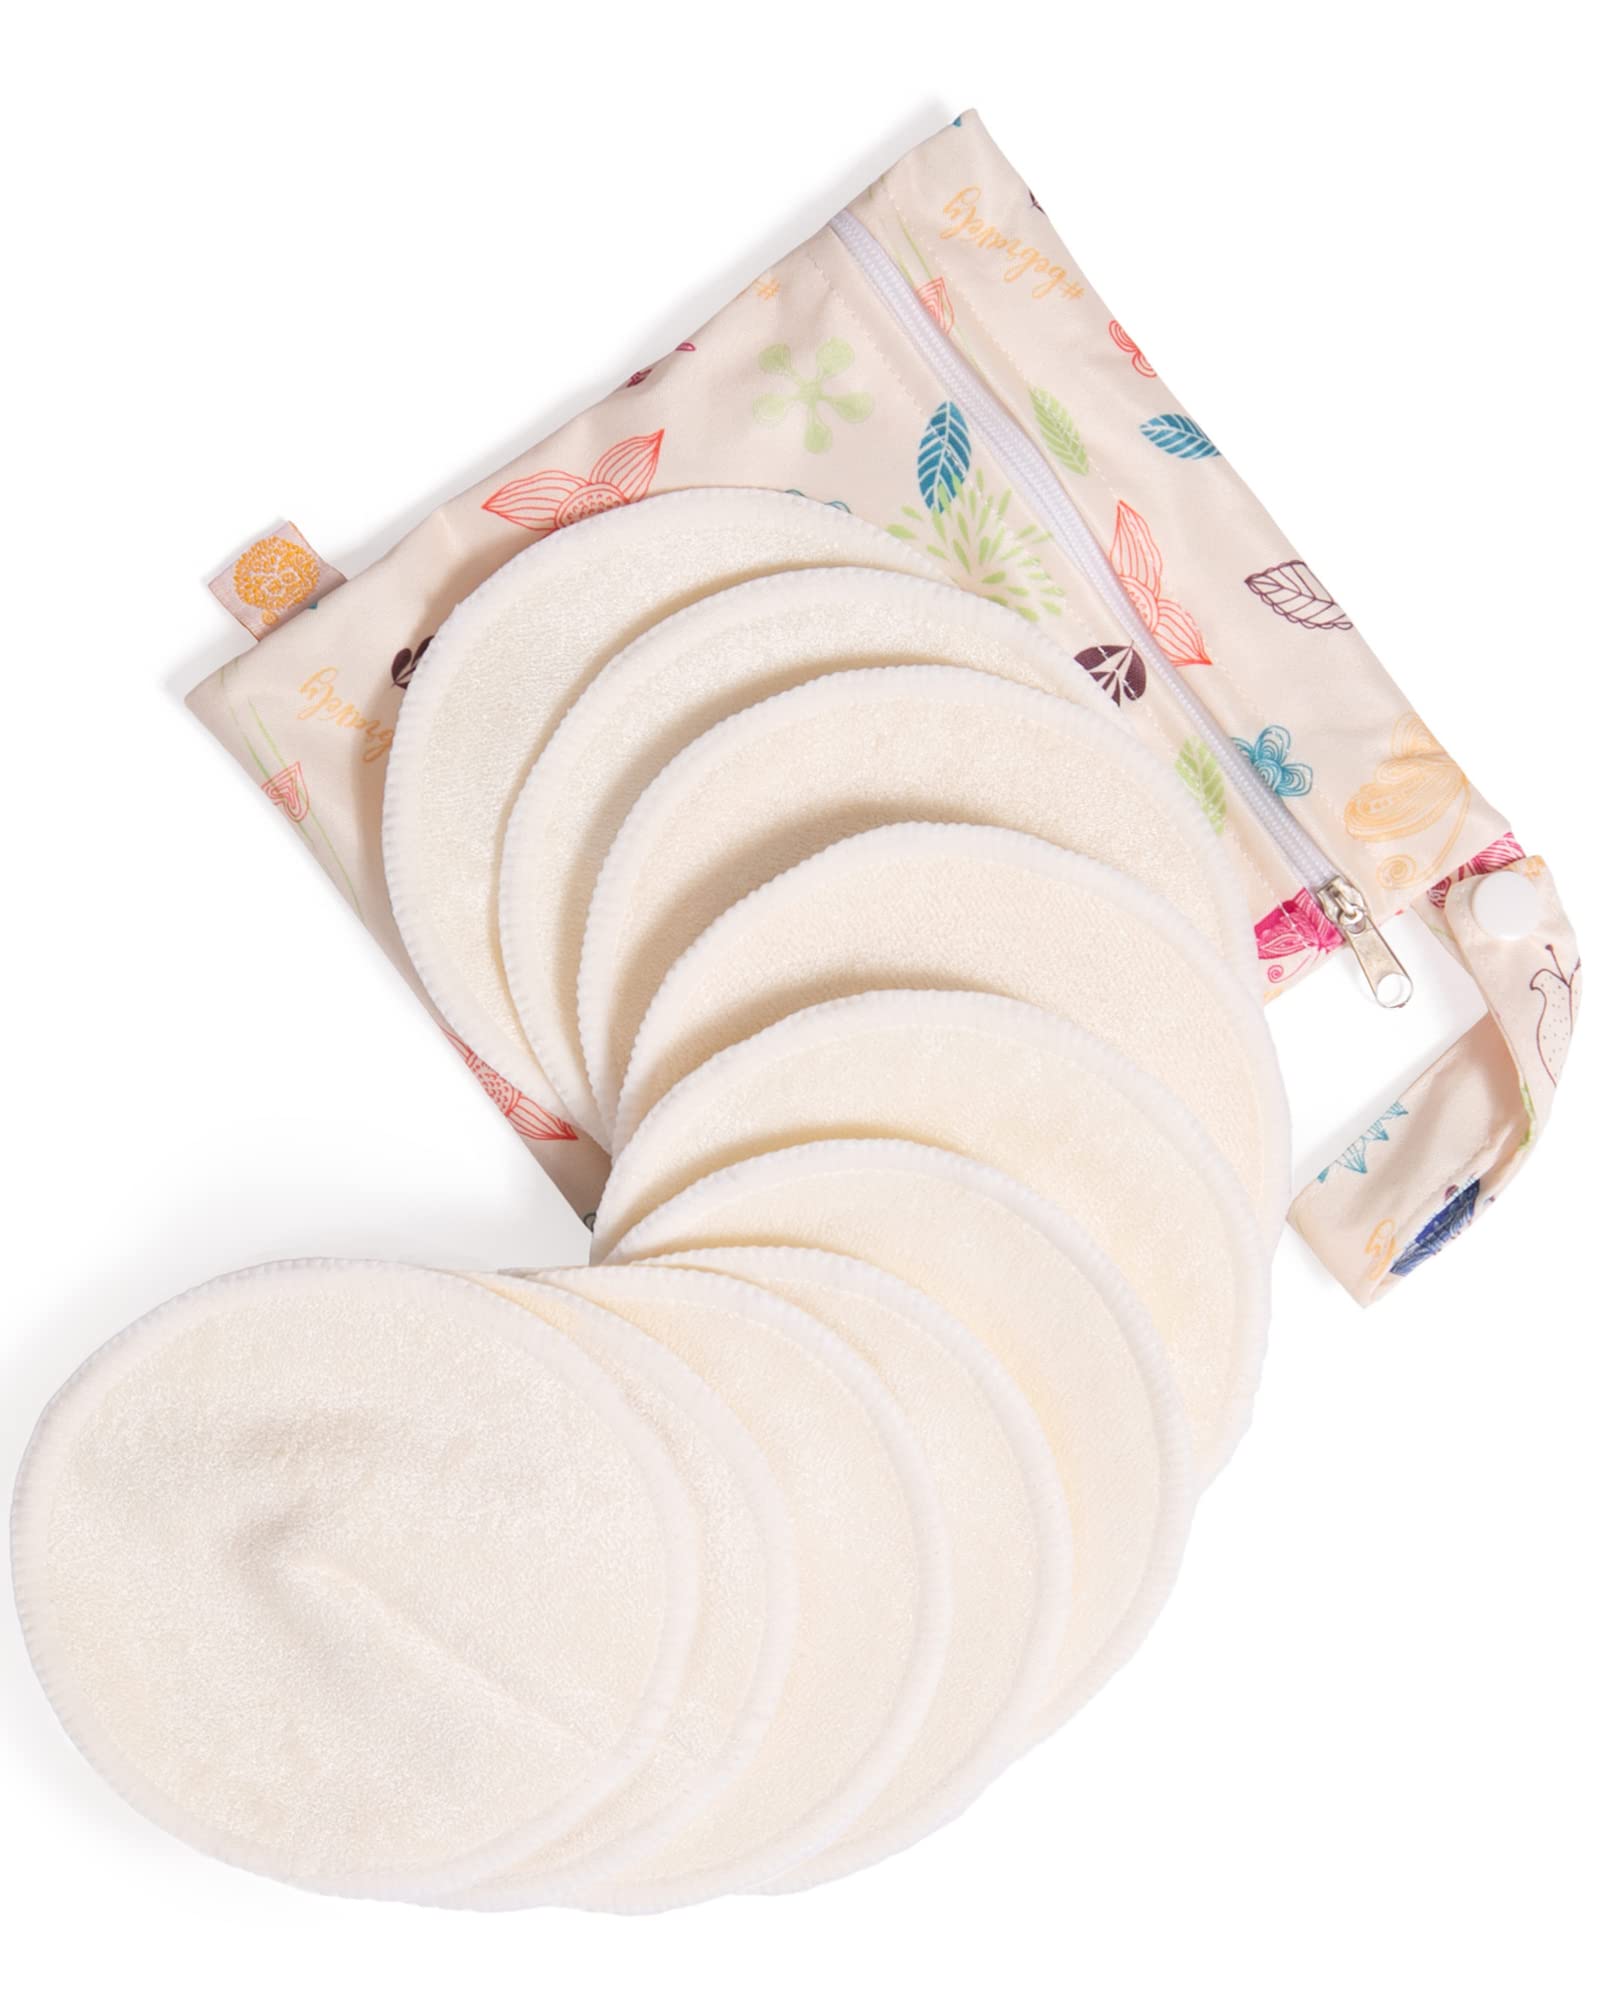 Book Cover Kindred Bravely Organic Reusable Nursing Pads 10 Pack | Washable Breast Pads for Breastfeeding with Carry Bag Regular 10-Count Beige Multicolored